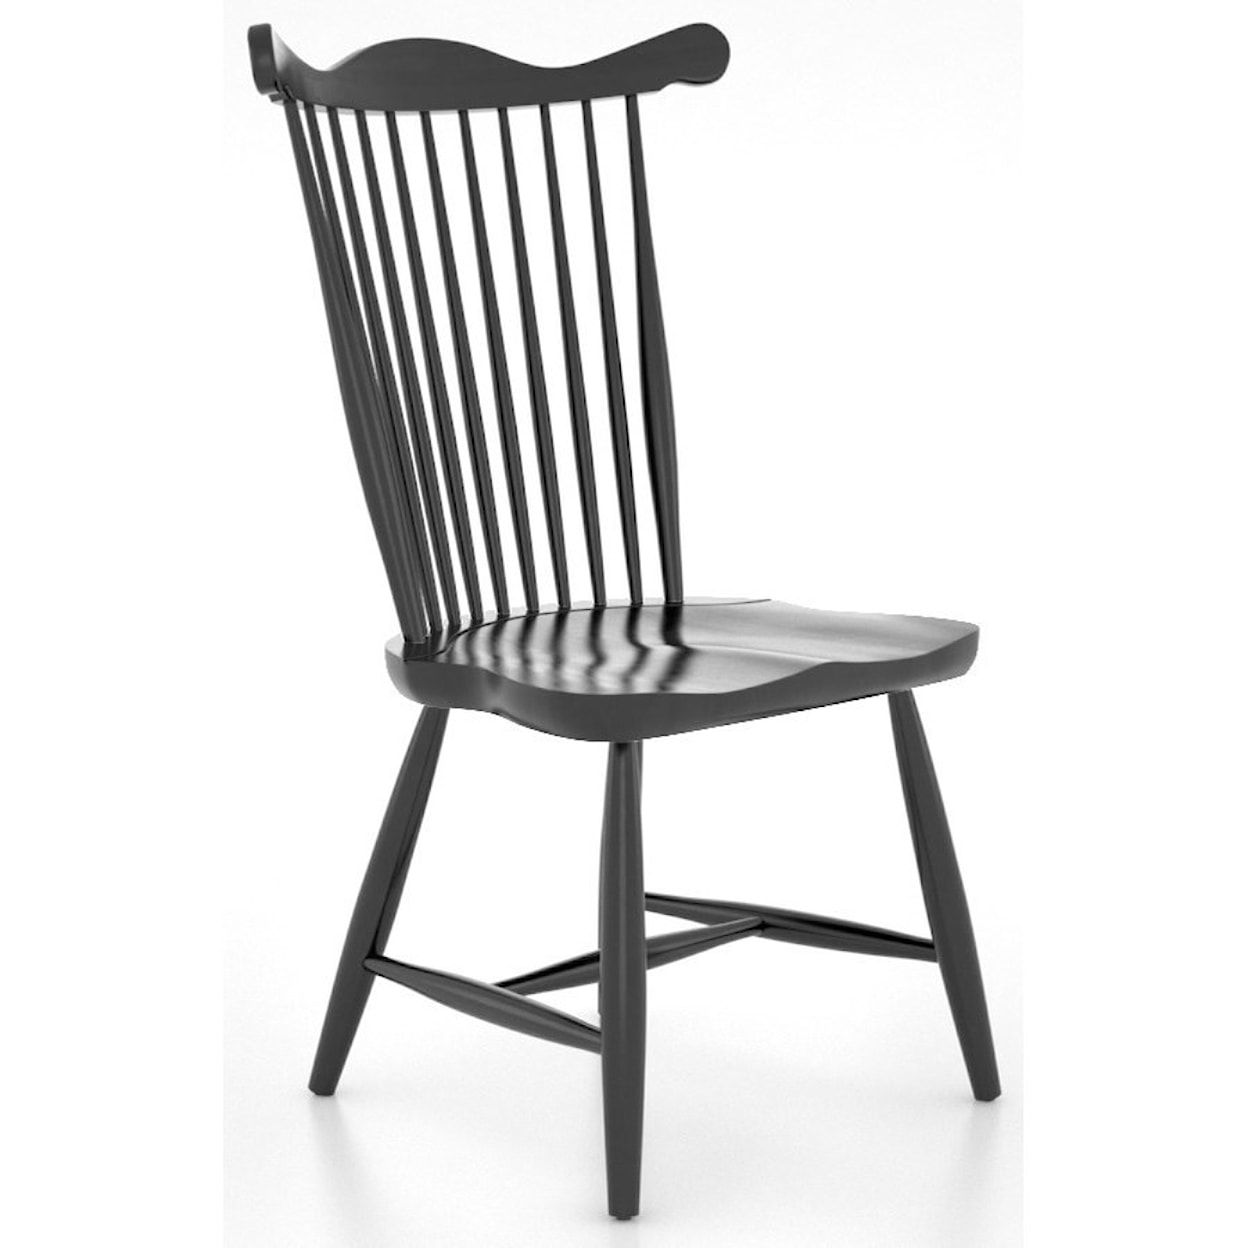 Canadel Canadel All-Wood Side Chair